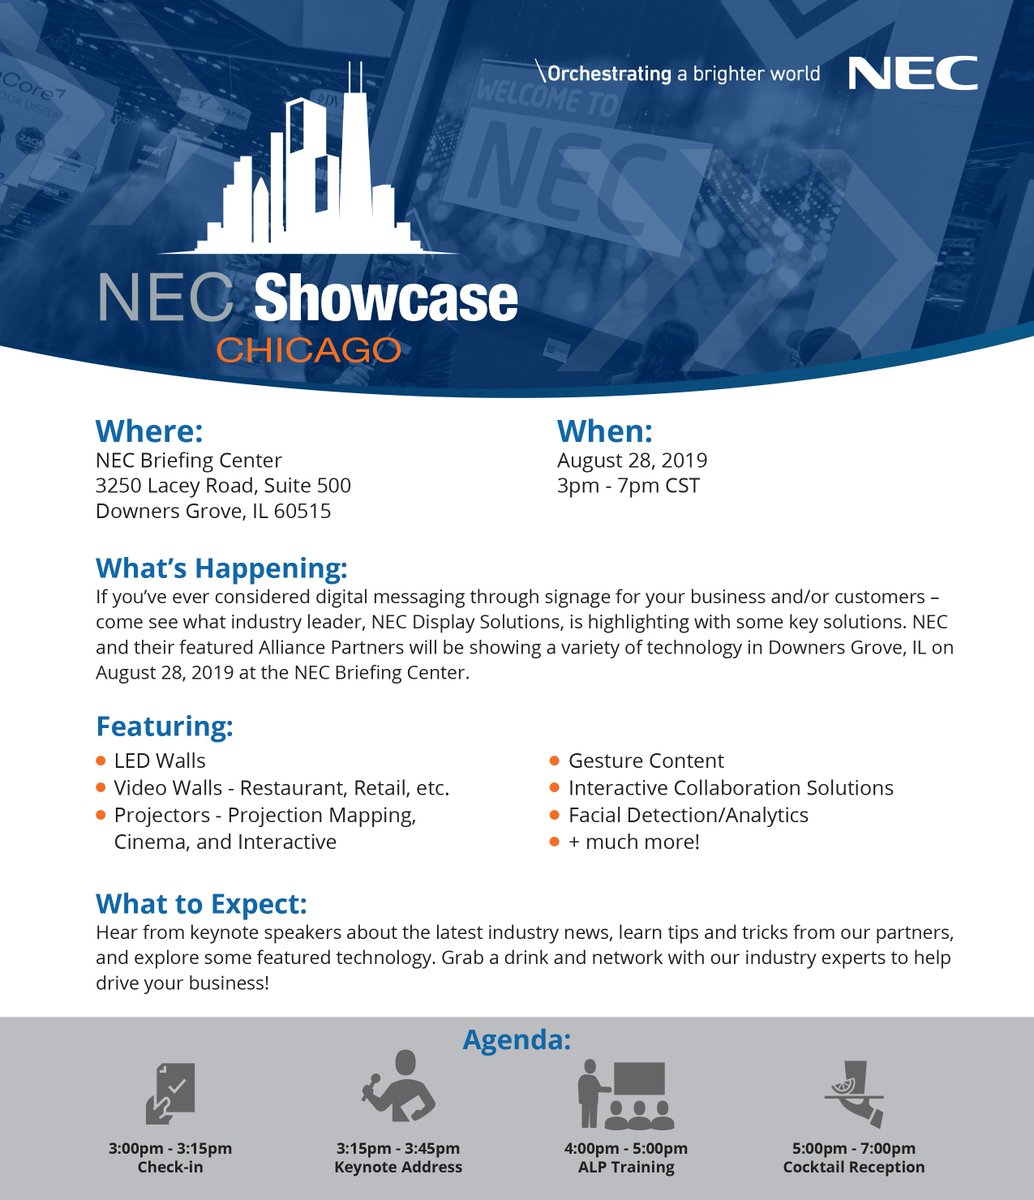 #ICYDK We are having our first #NECshowcase in #Chicago on 8/28/19 as part of a #Roadshow. Register: necdisplay.com/showcase/showc…  #avtweeps #proav #analytics #projectionmapping #tech #displaysolutions  #audiovisual #facialdetection #CloudComputing #gestures